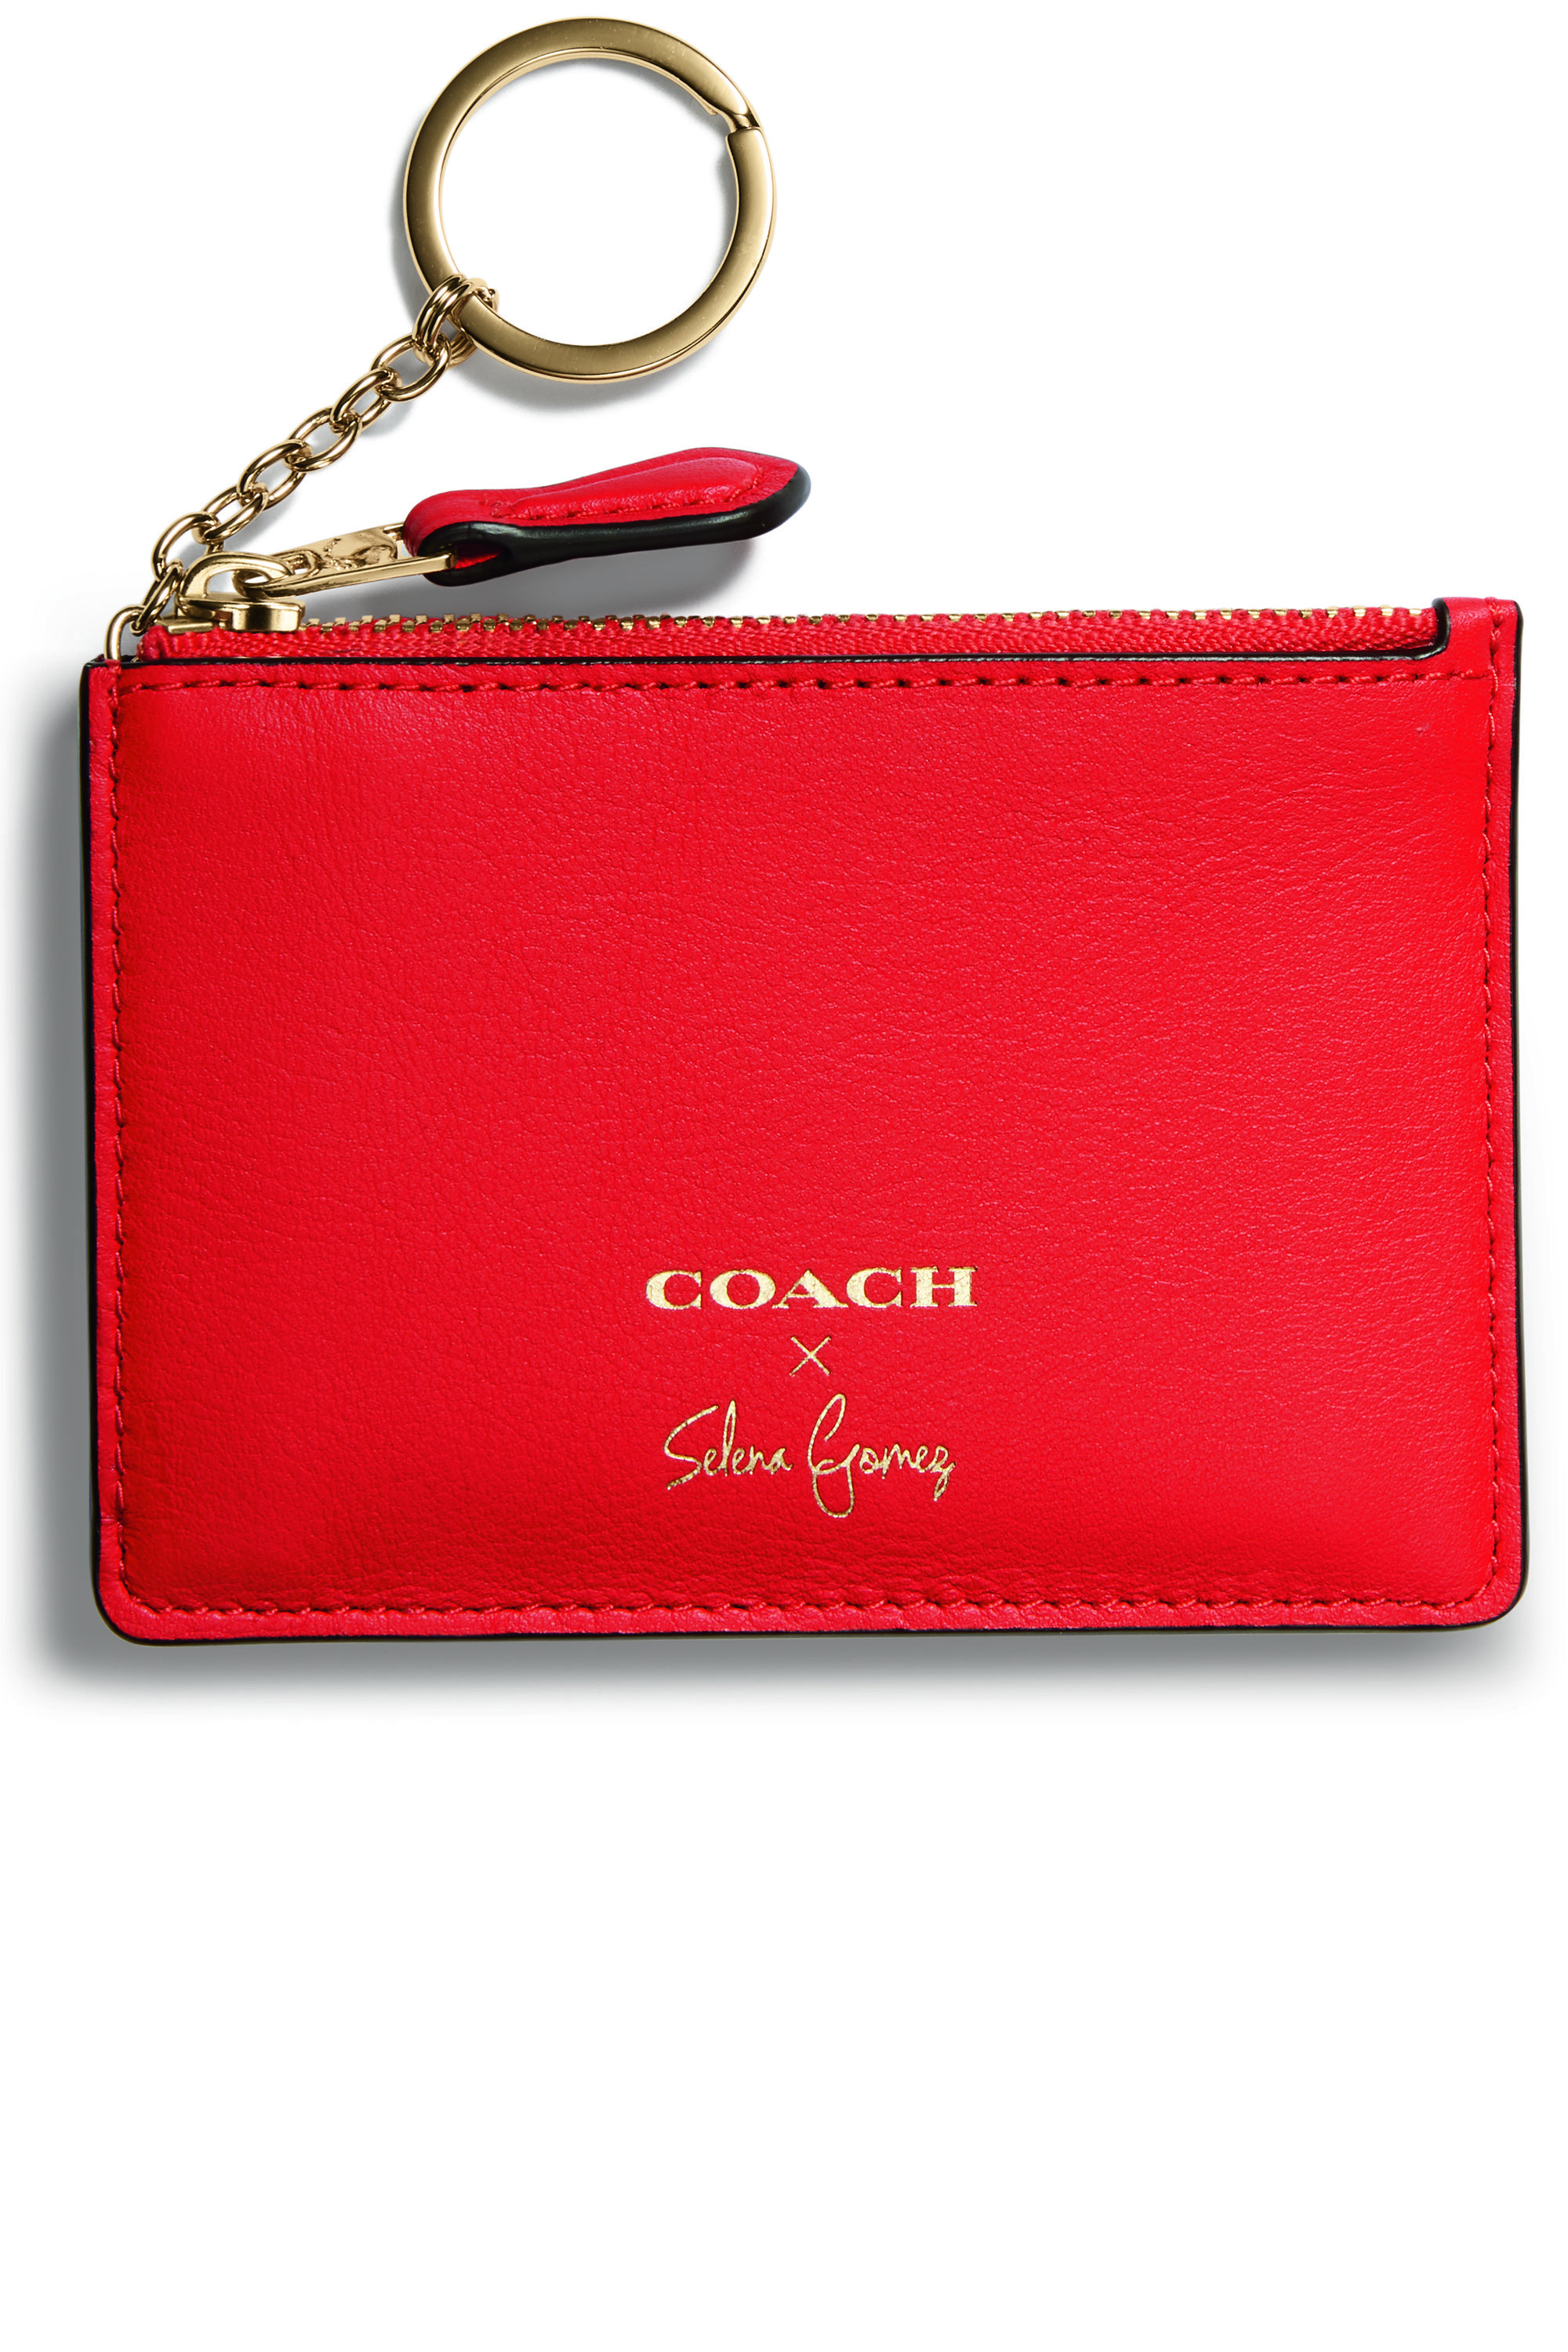 Selena Gomez x Coach Unveils New Collection - Fashion Trendsetter